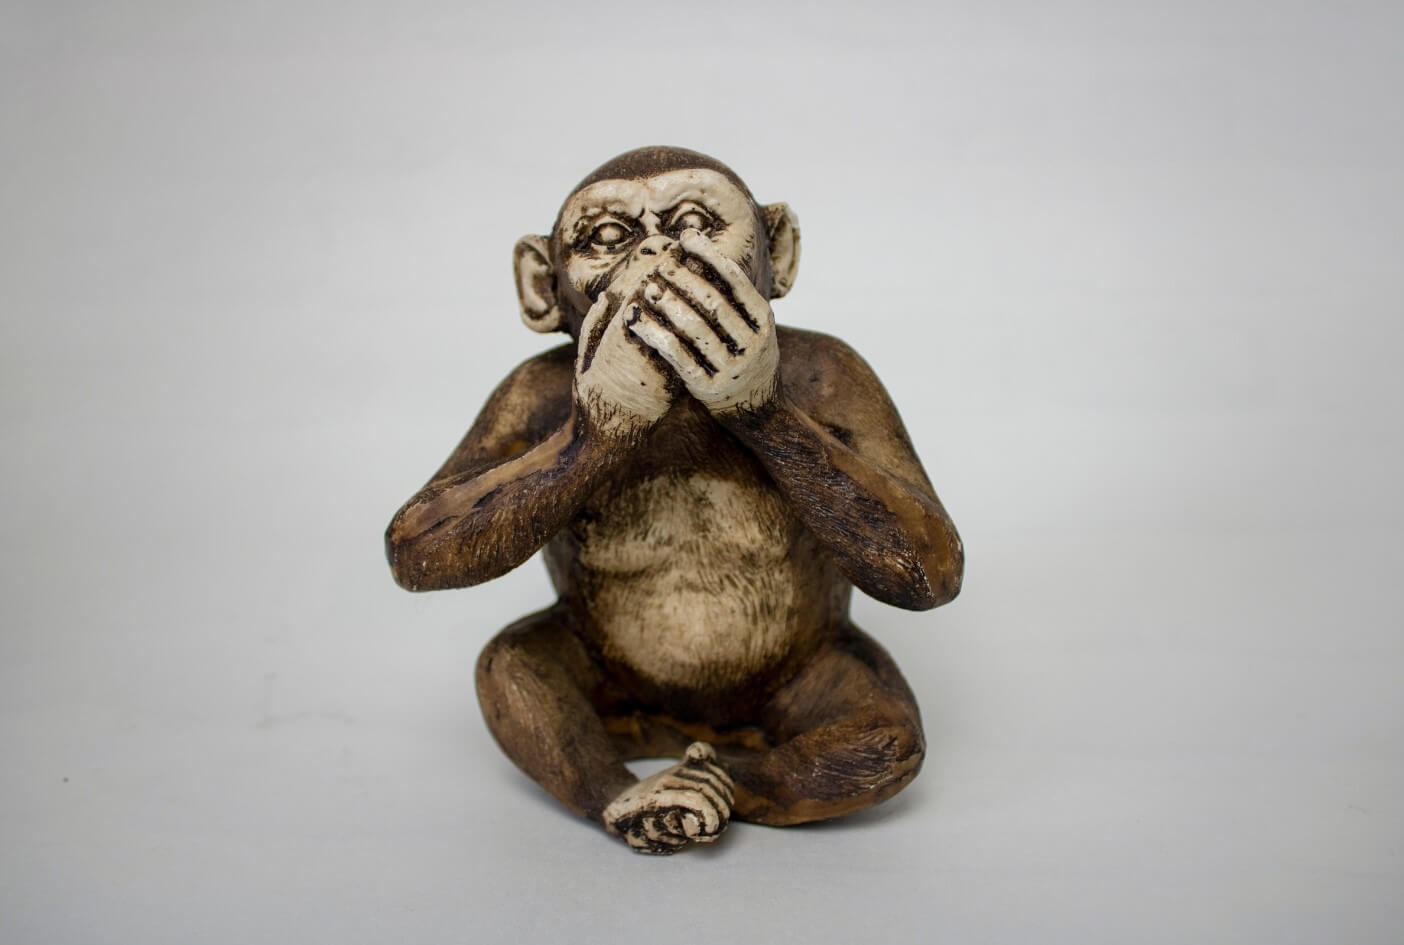 A "speak no evil" monkey with its hands over its mouth representing the social filter good teachers maintain.